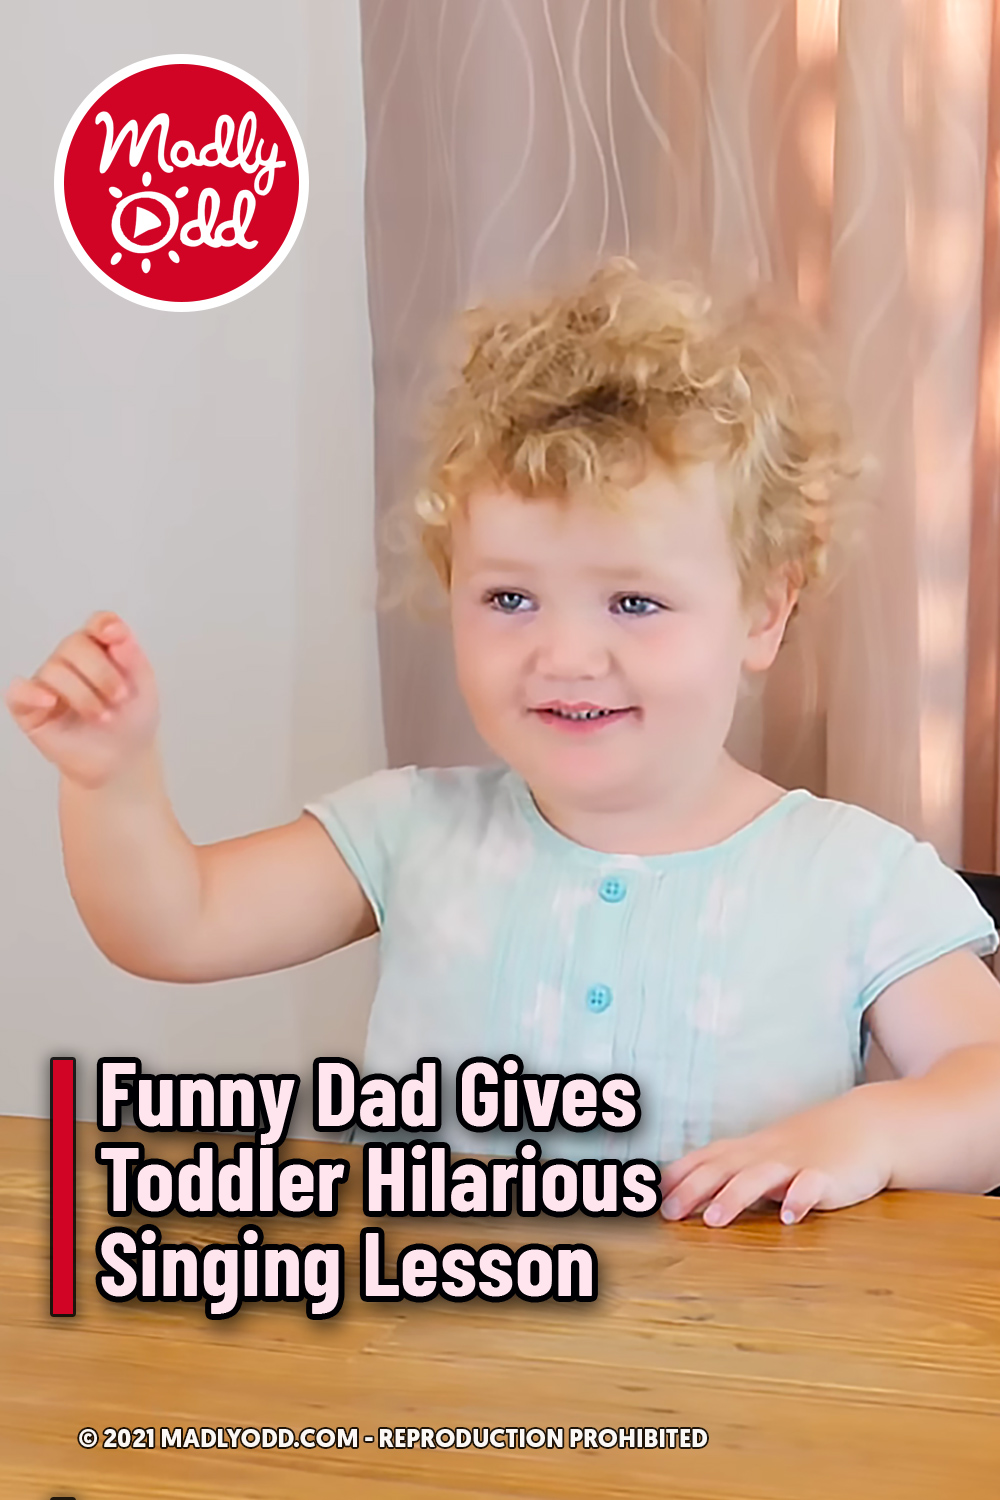 Funny Dad Gives Toddler Hilarious Singing Lesson